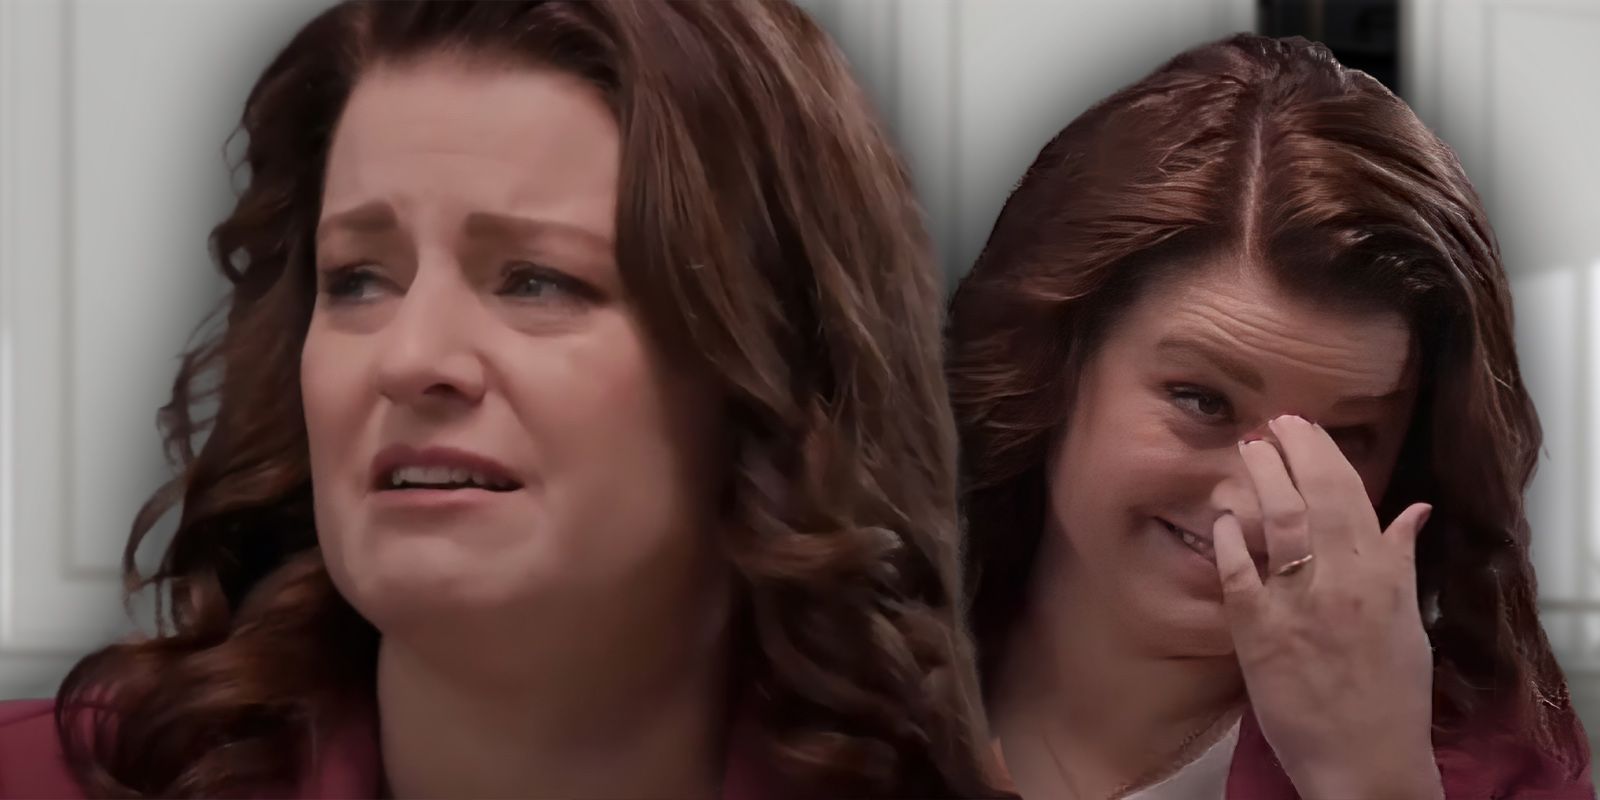 Robyn Brown from Sister Wives crying in two images